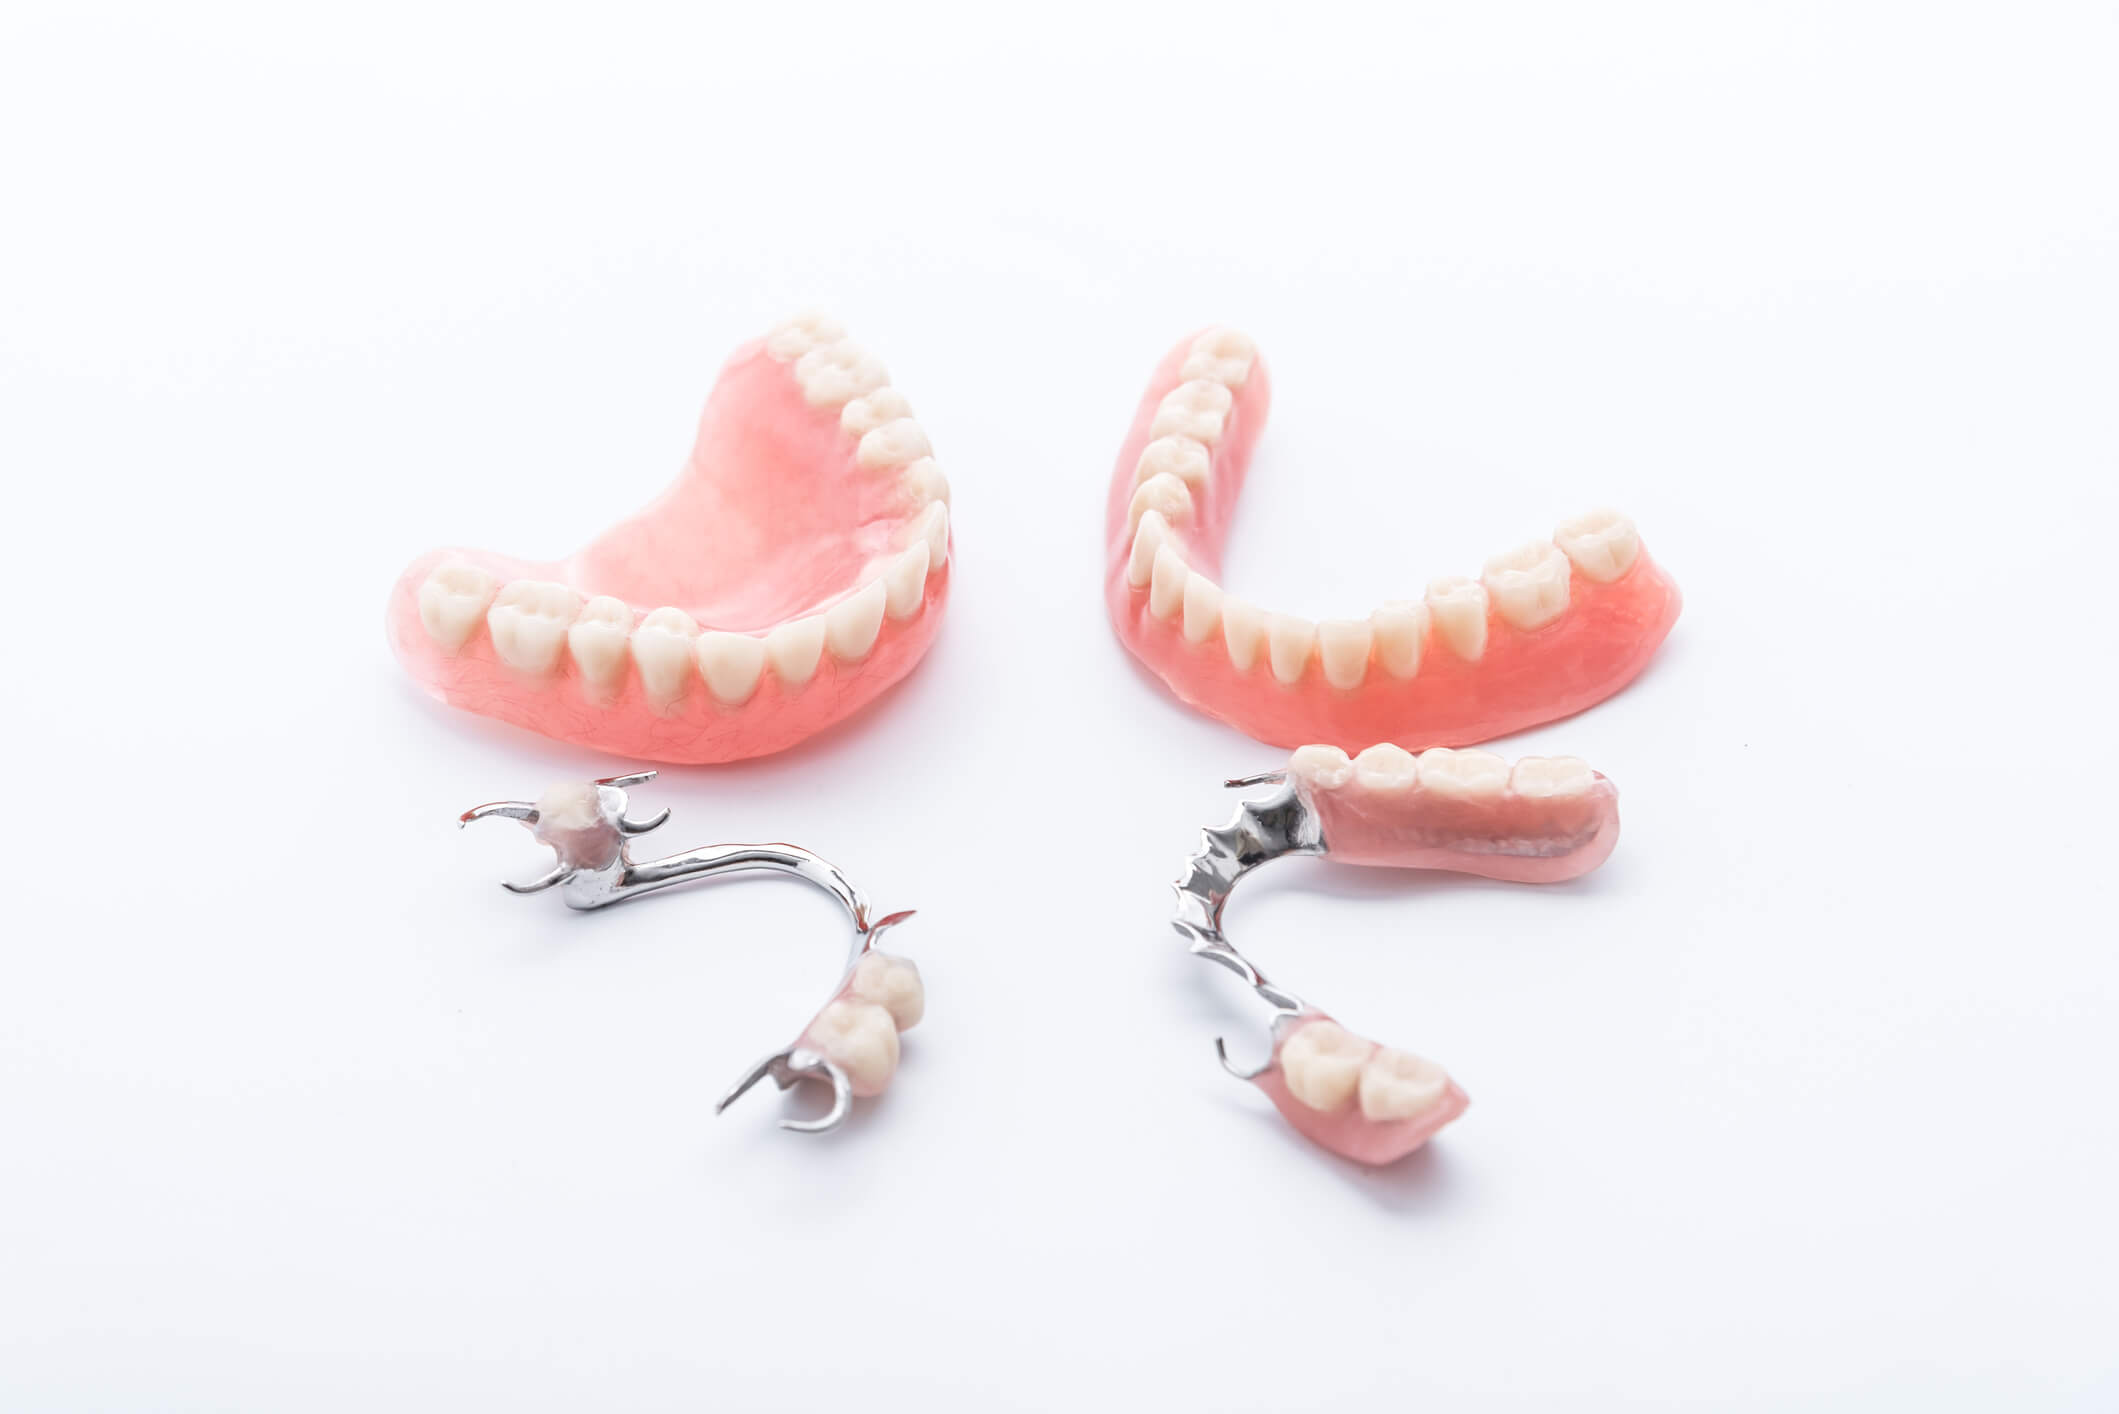 photo of full set dentures and partial dentures